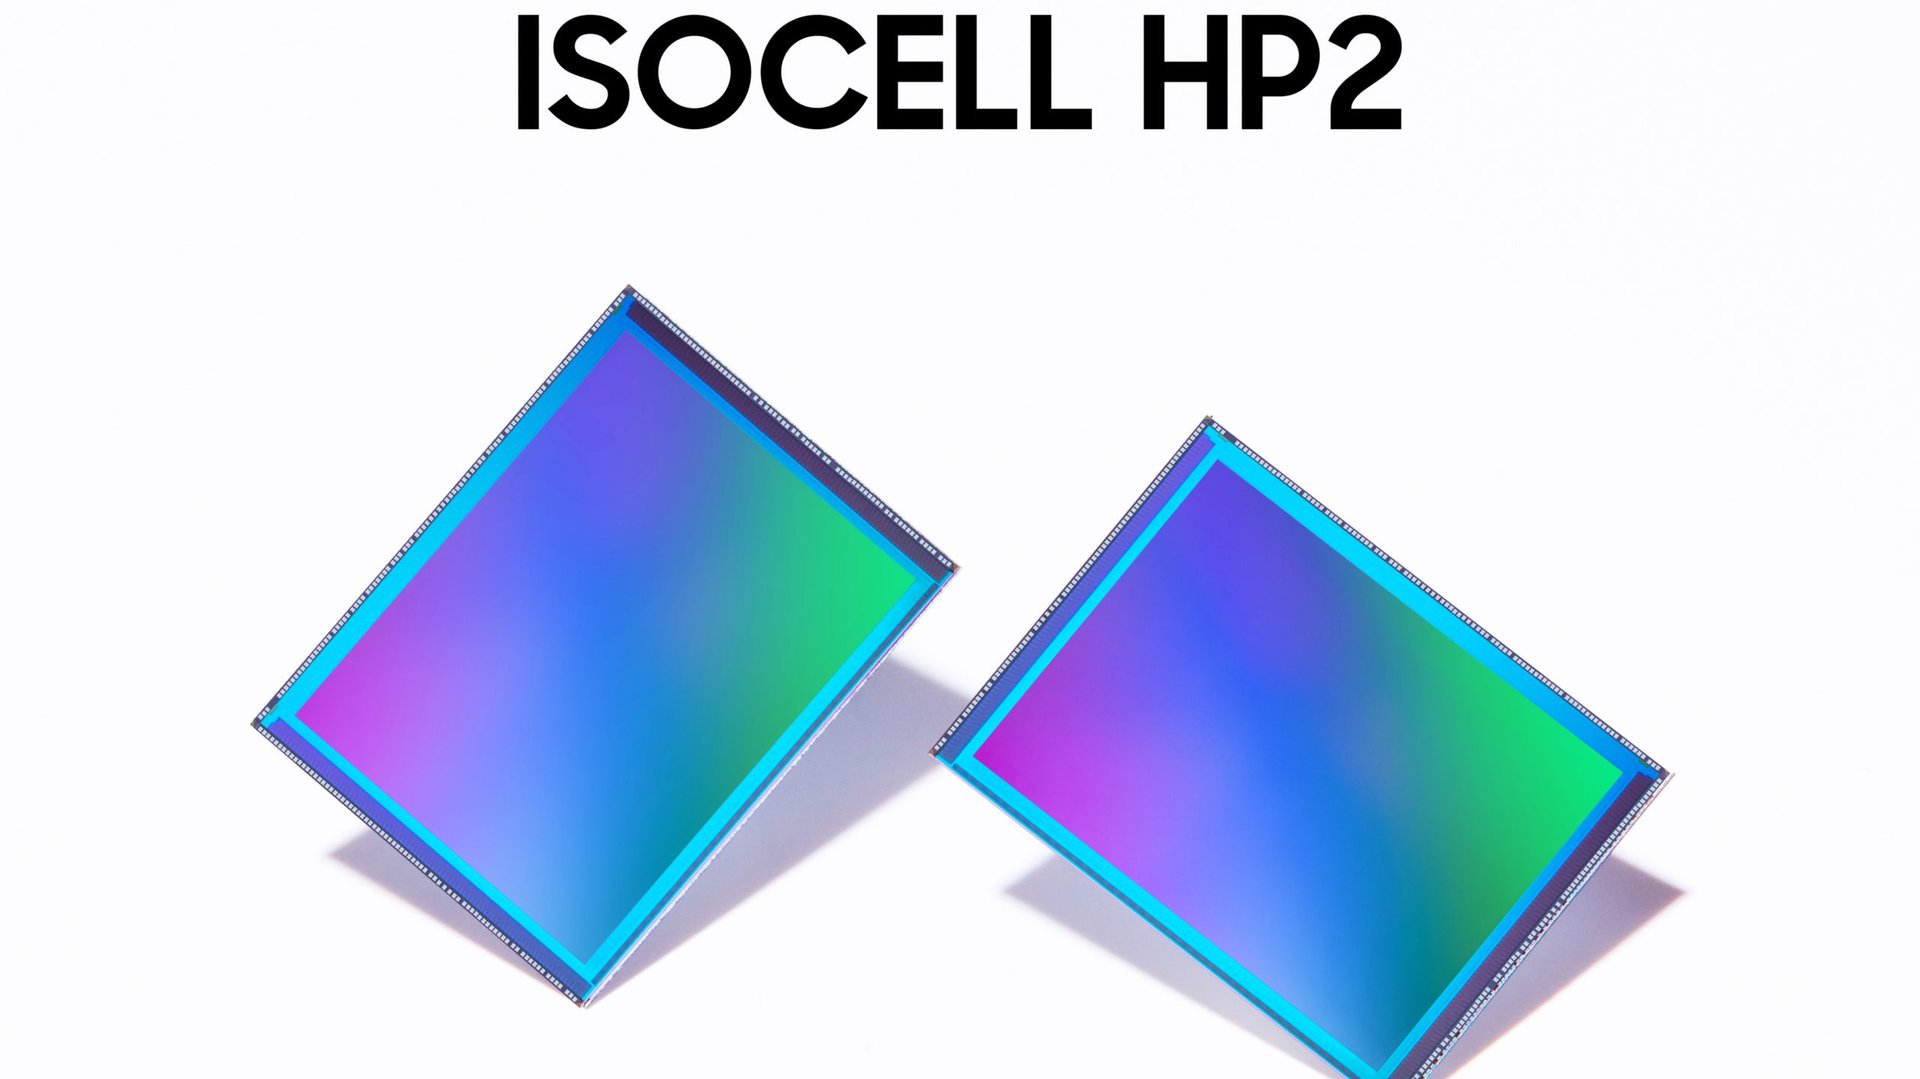 Samsung ISOCELL HP 2